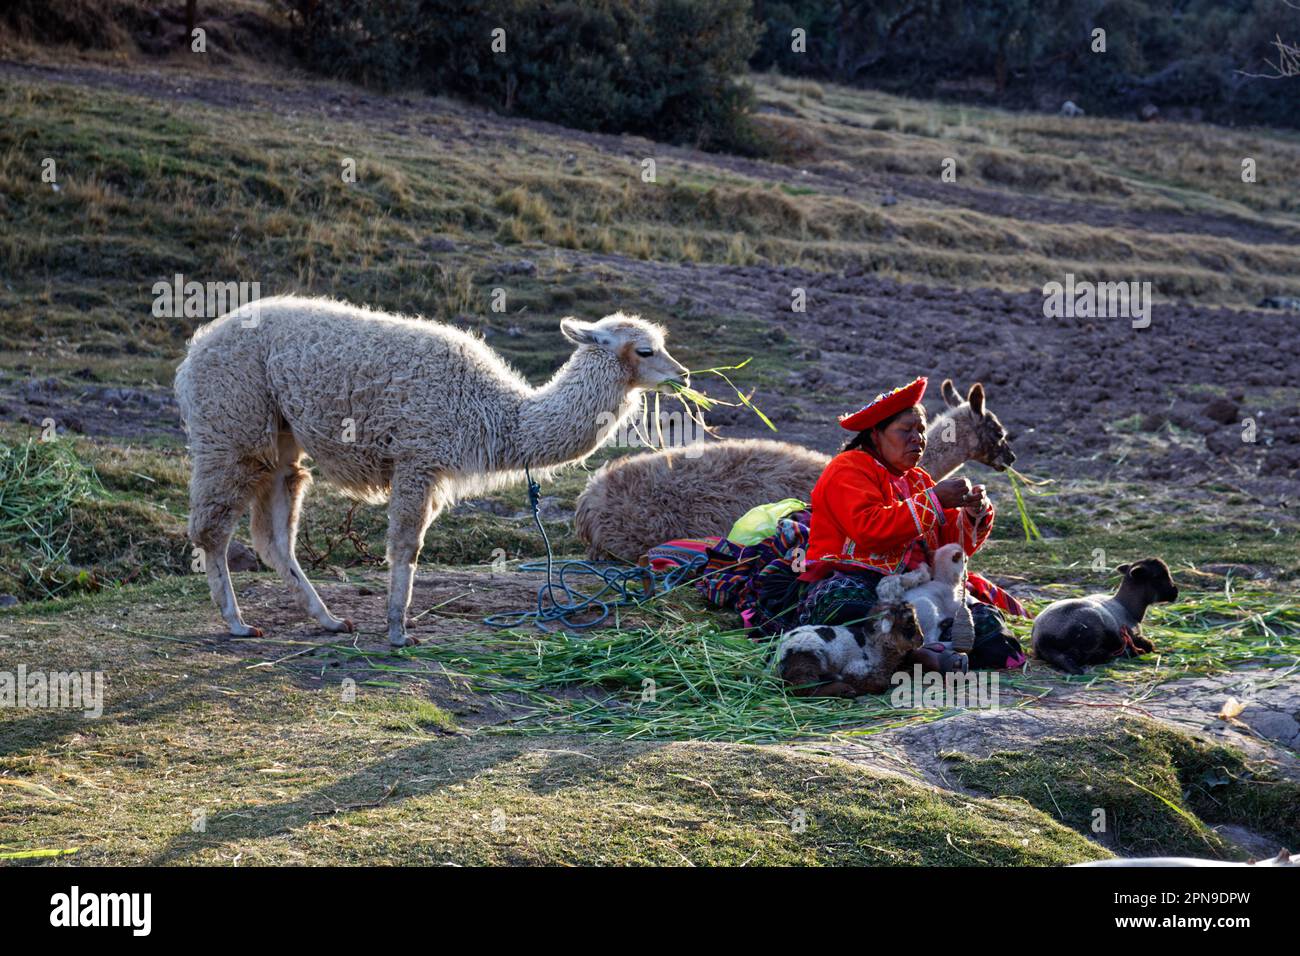 Peruvian locals dressed up in traditional clothes sitting on the ground with their animals Stock Photo